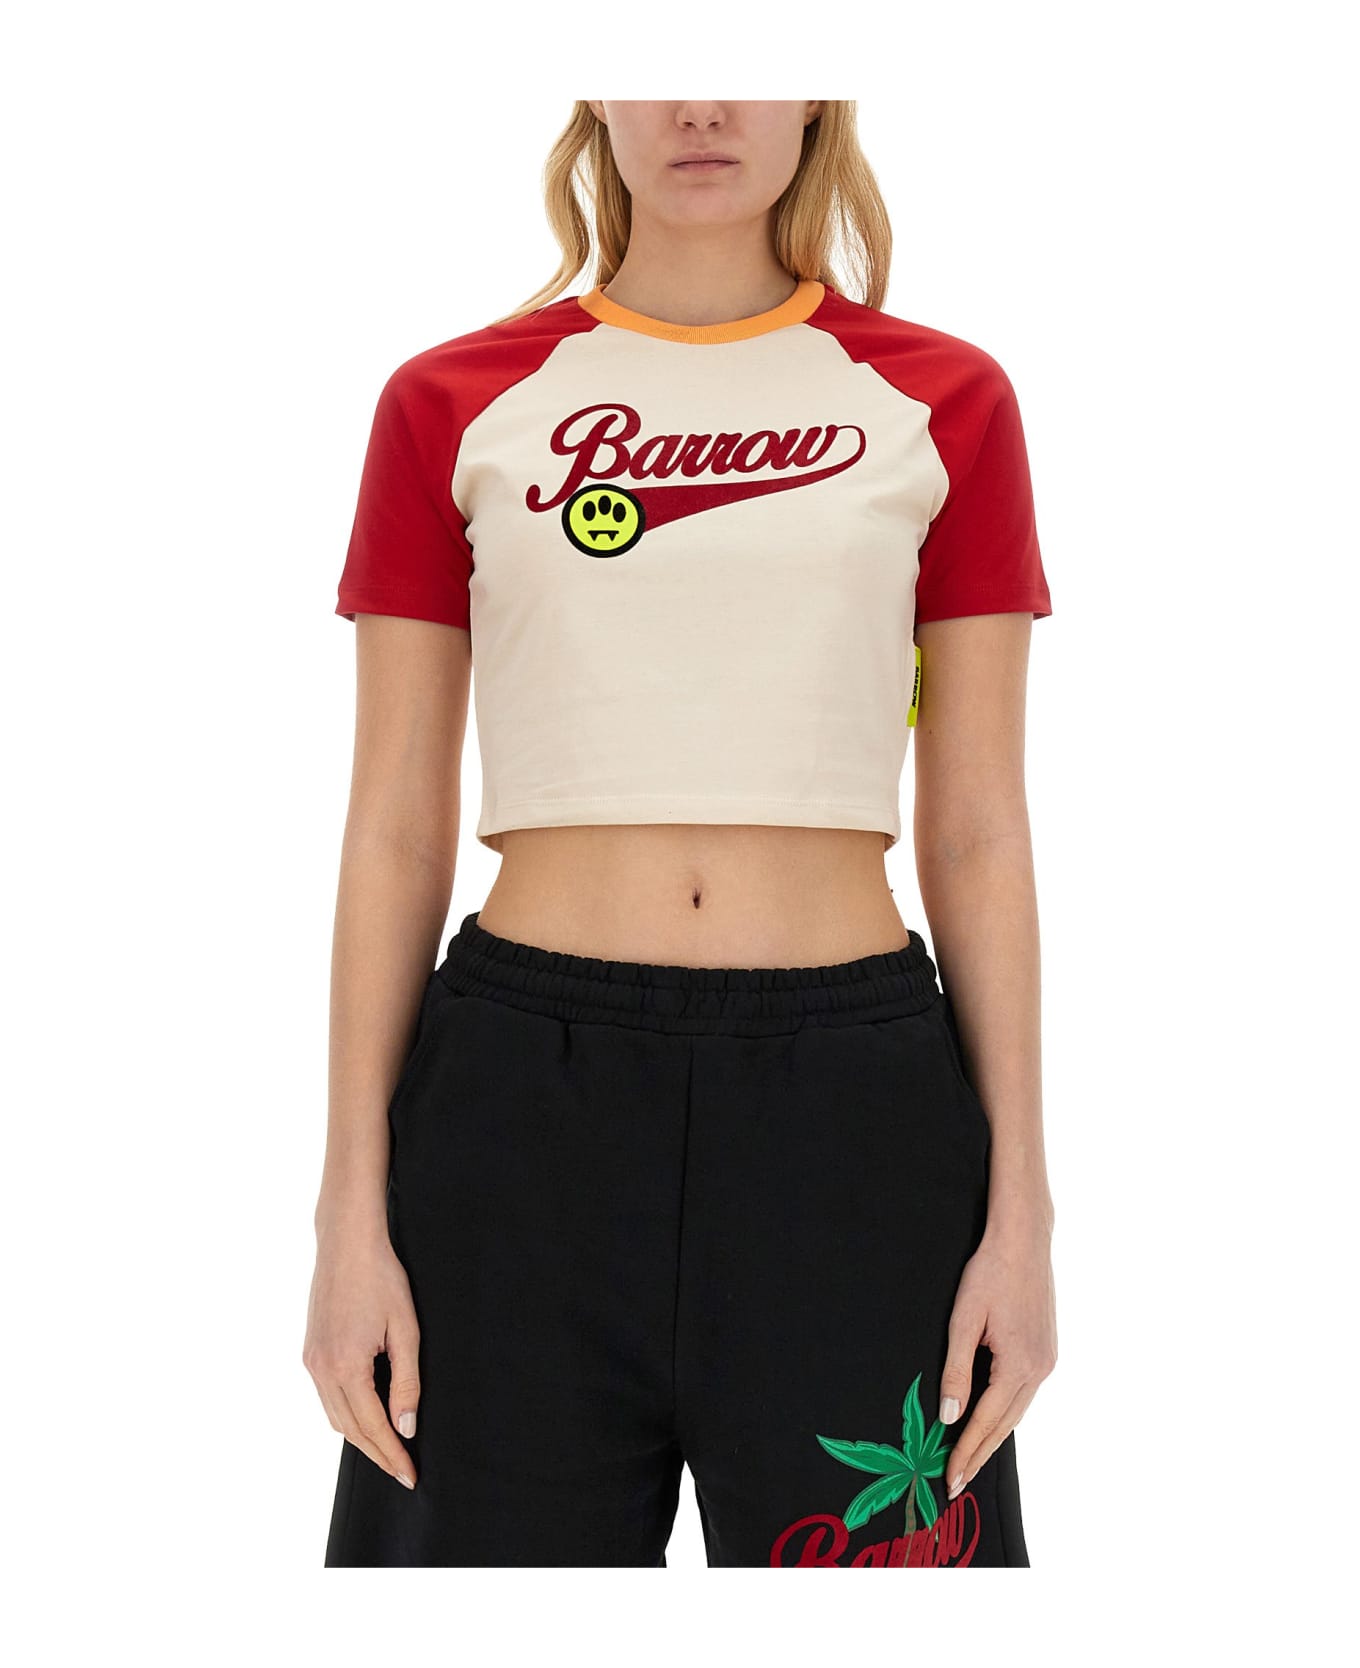 Barrow Cropped T-shirt - MULTICOLOR